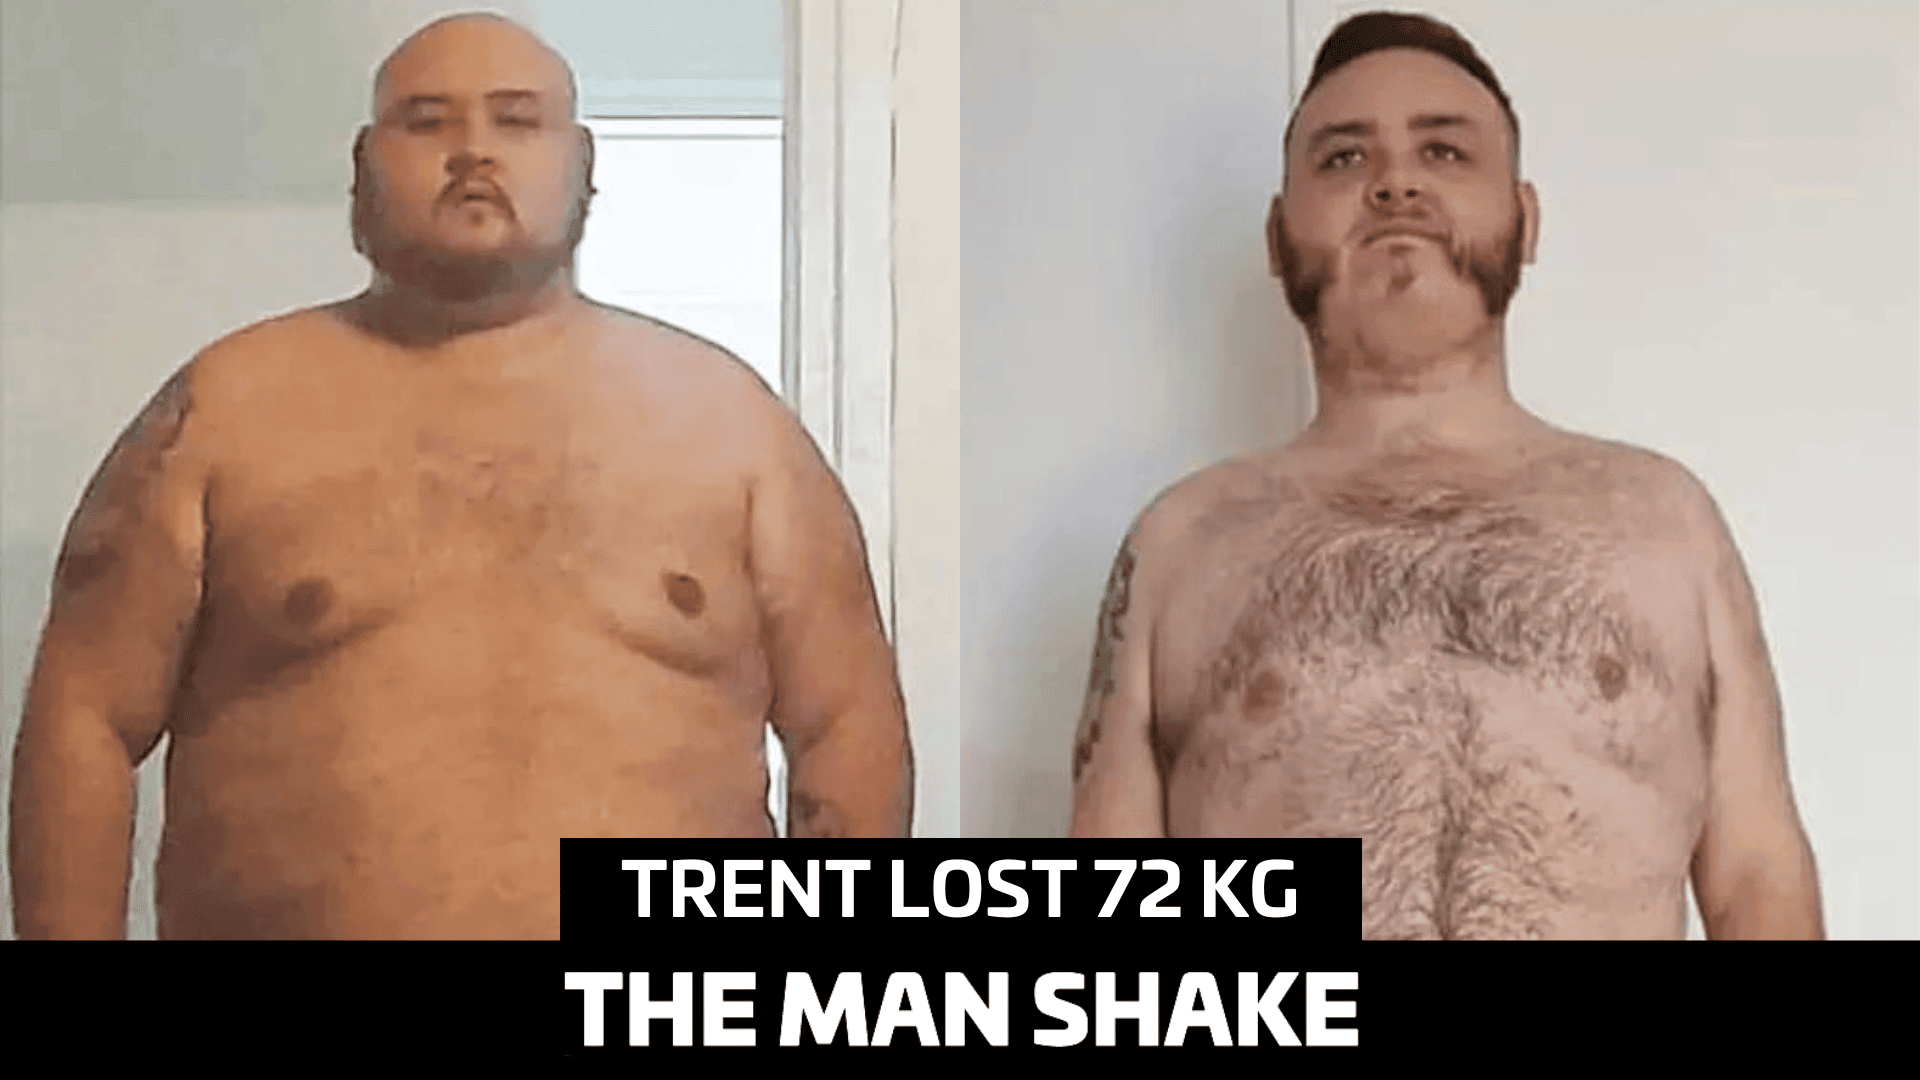 Trent lost a mind blowing 72kg and gained a new outlook!